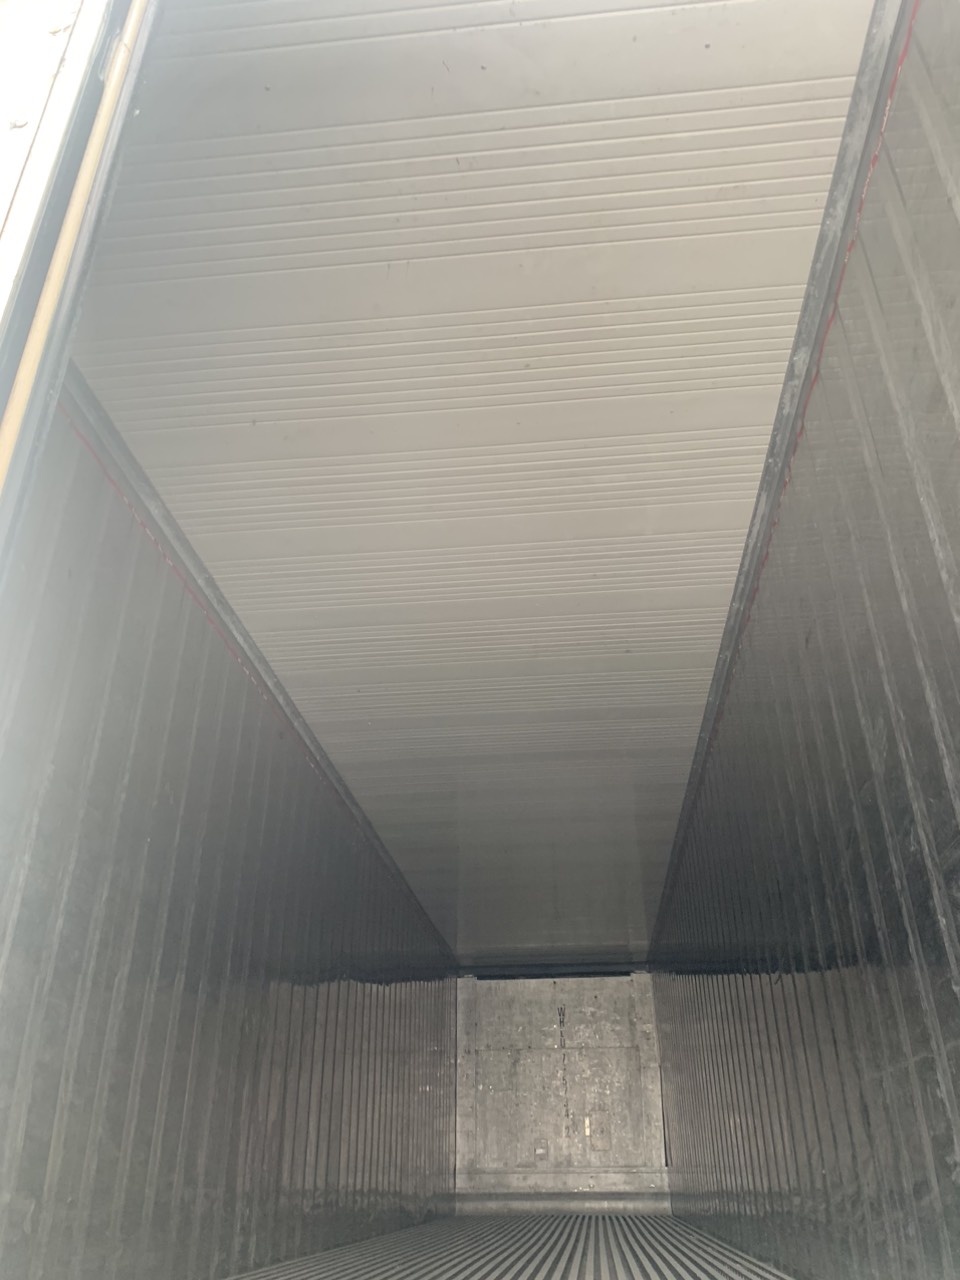 CONTAINER LẠNH 40RH WHLU7757342